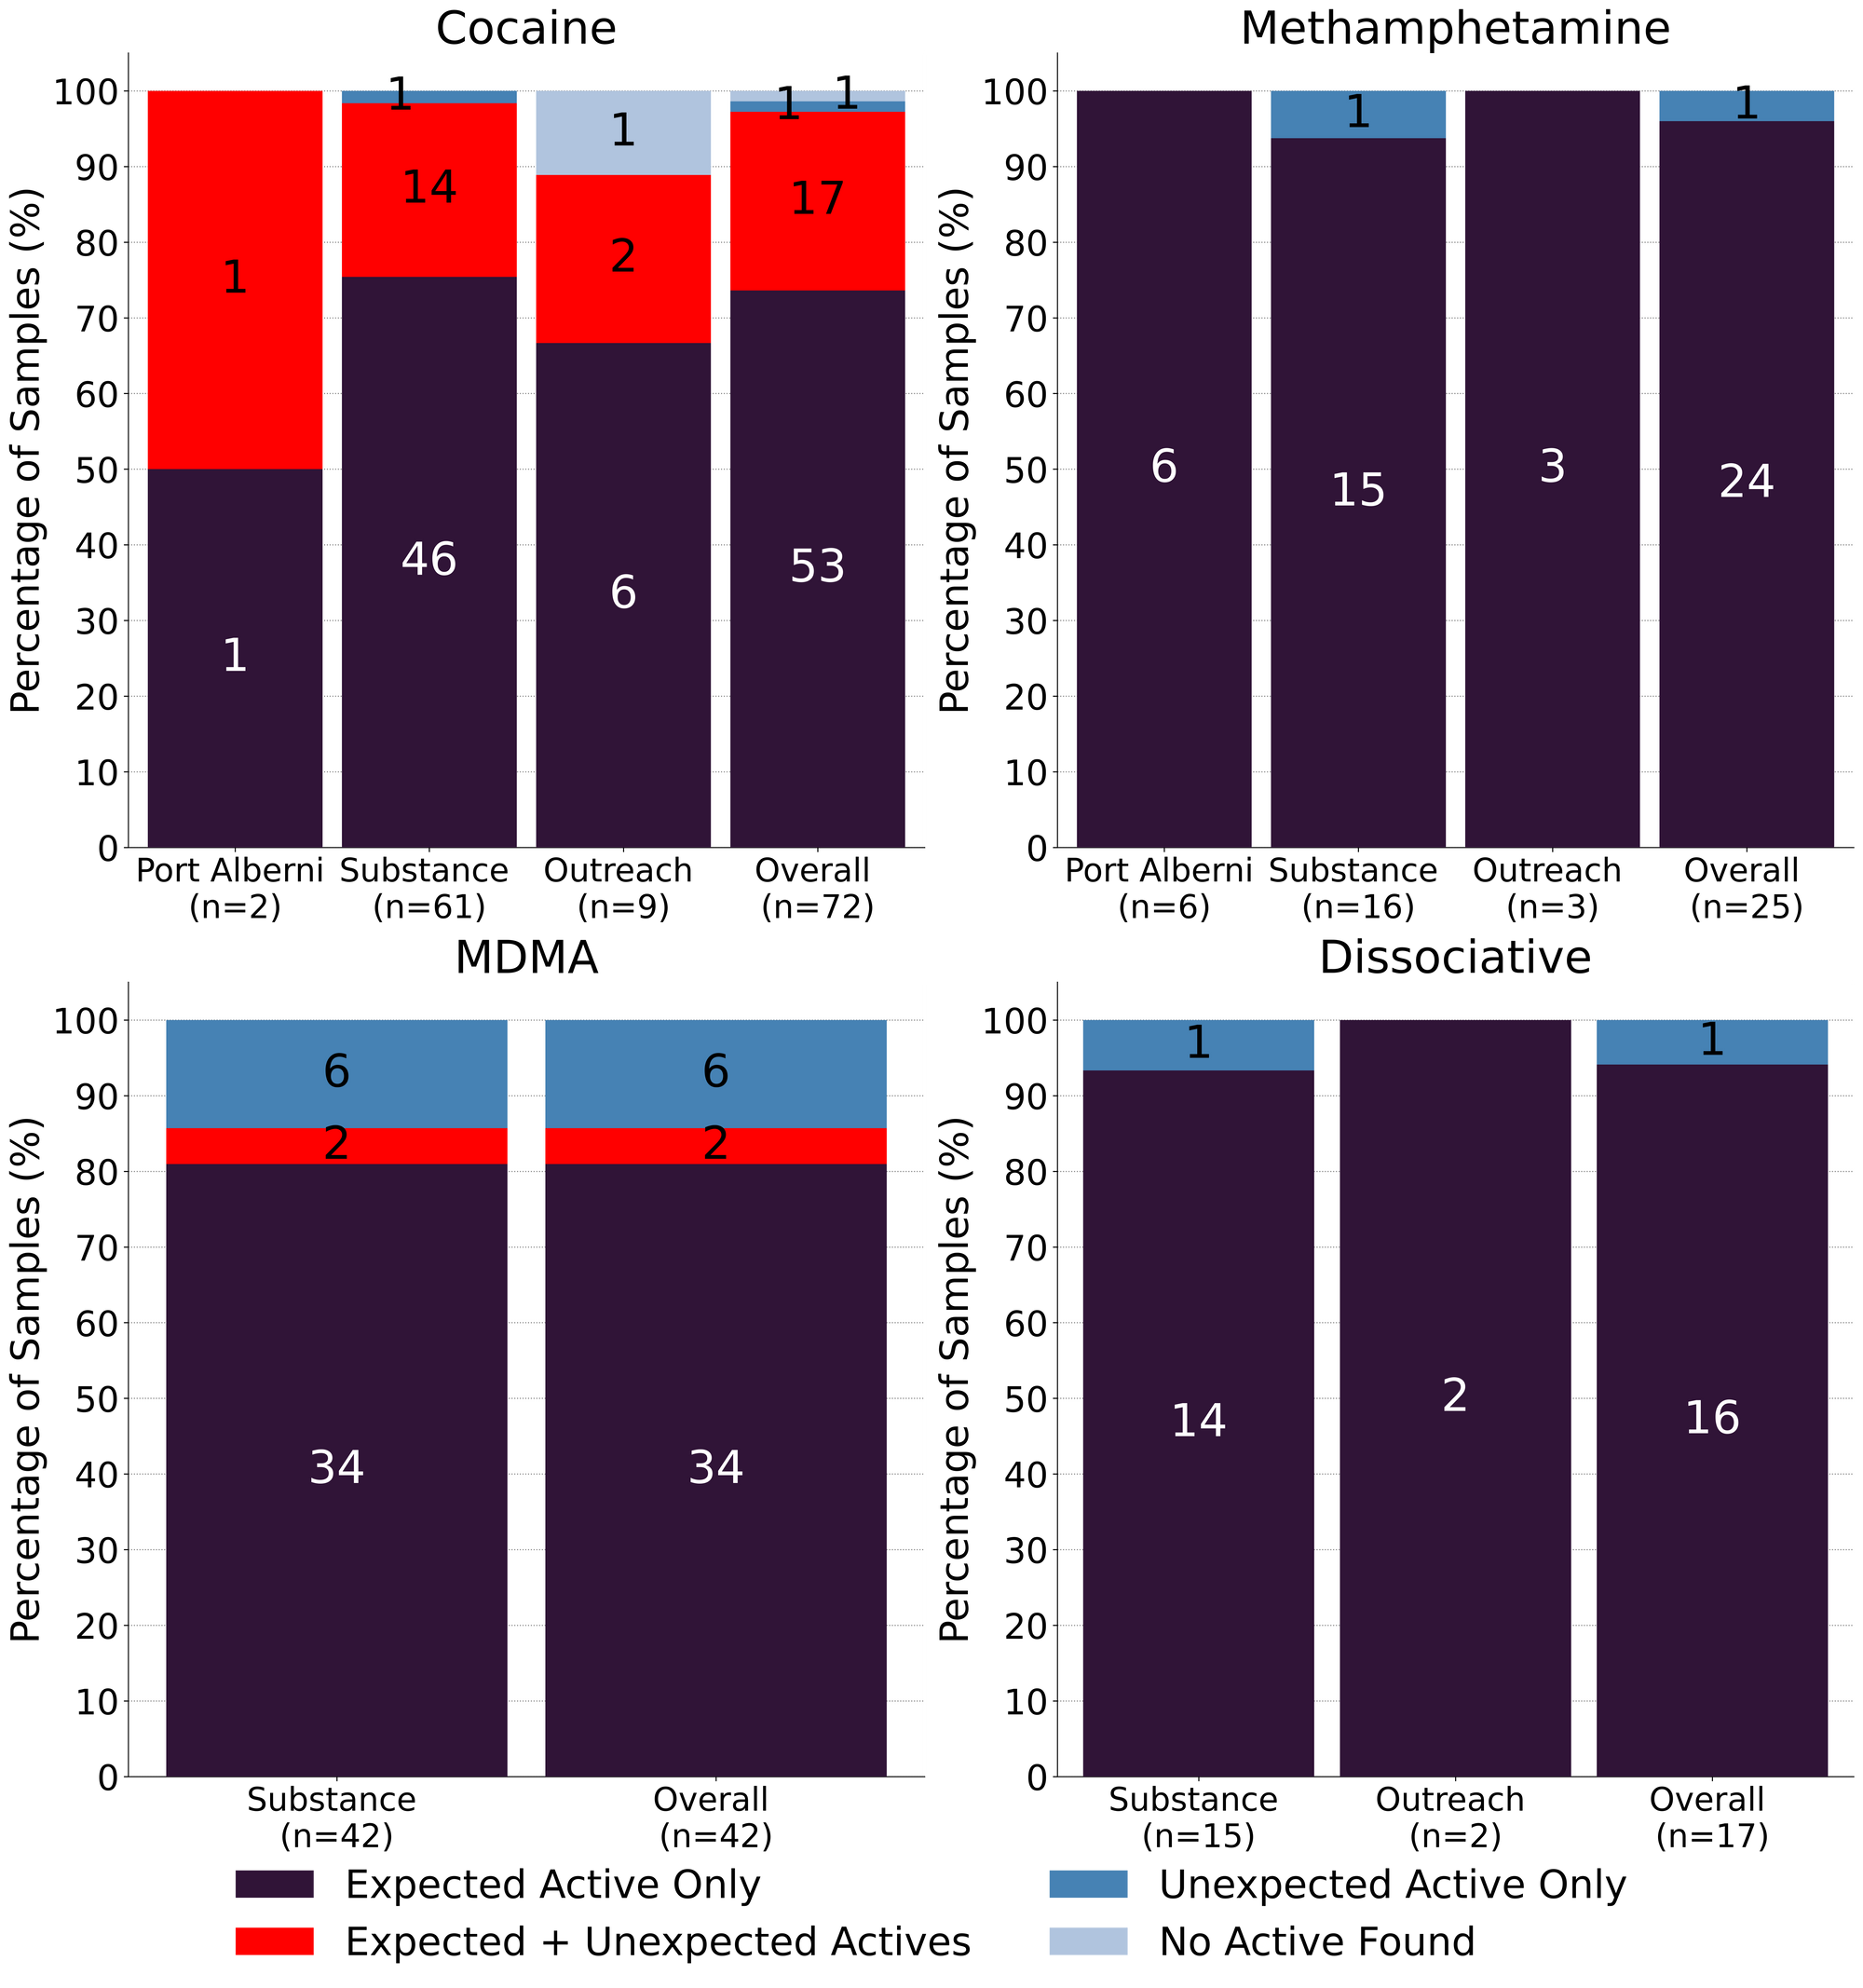 Figure 2. Adulteration breakdown by drug class and sample collection location/method. Bars are stacked by percentage of samples in each category, with the individual sample counts overlaid.